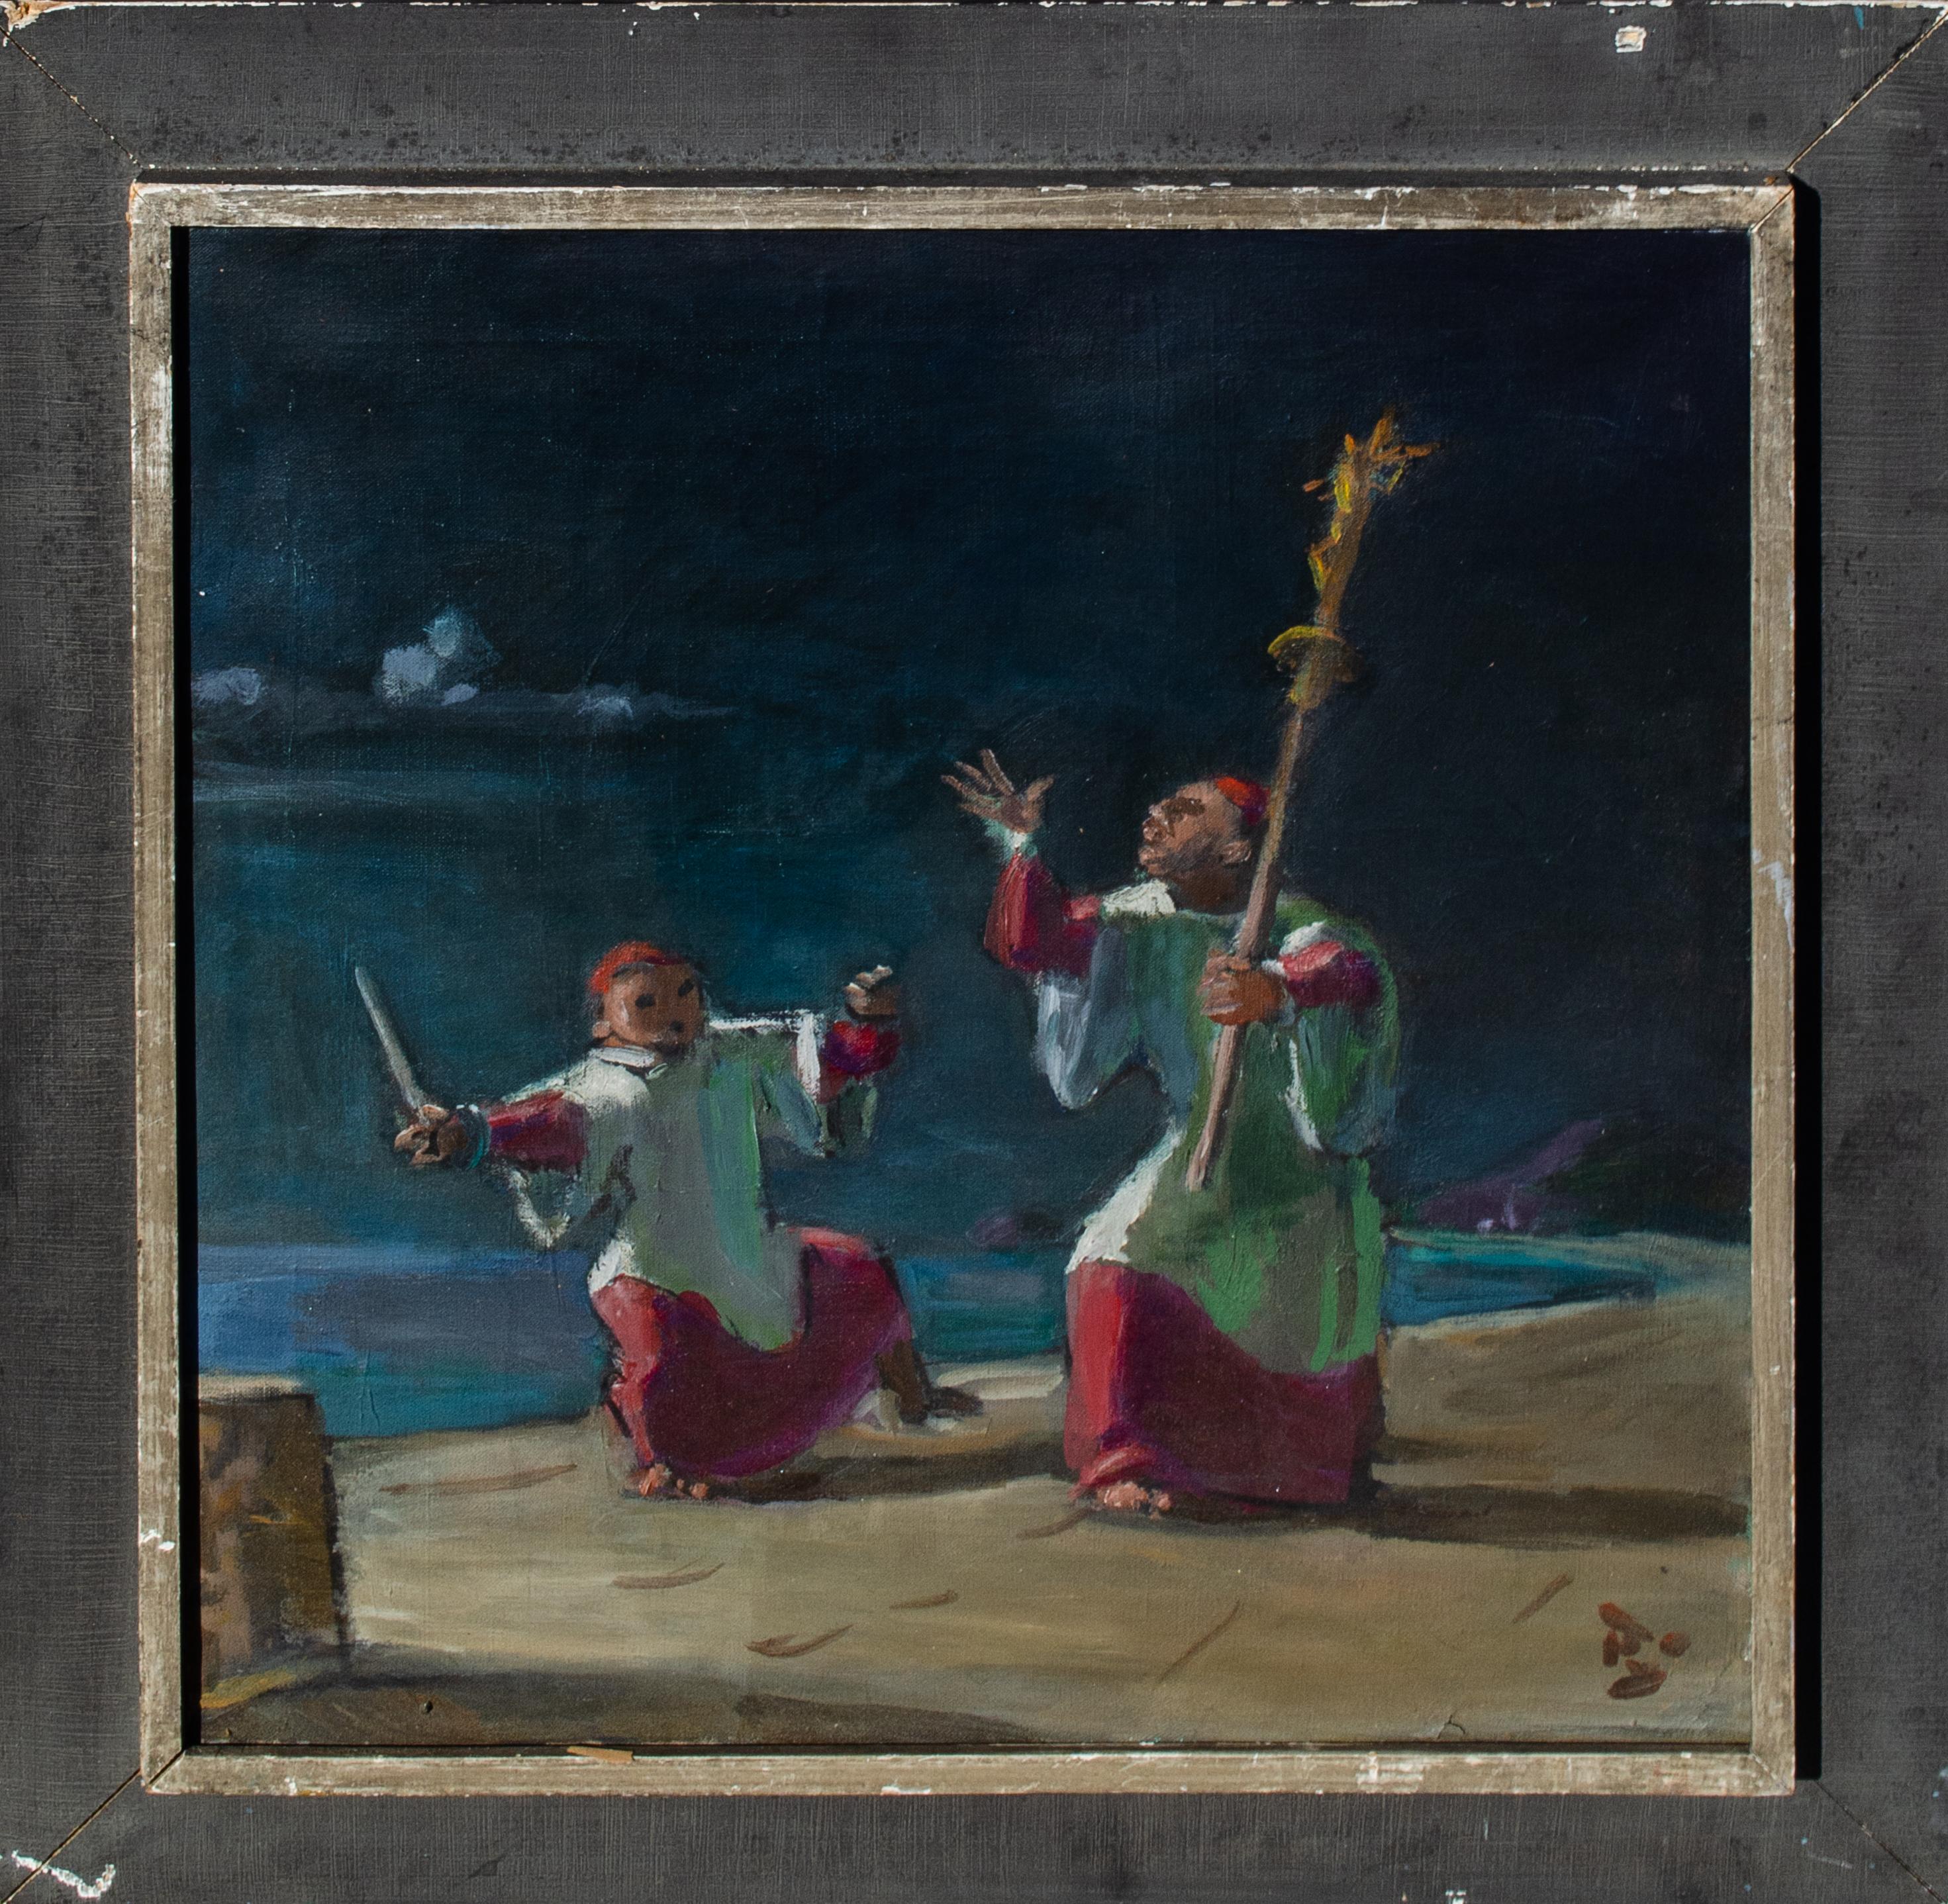 Mystery Artist
Untitled (Catholics), c. 20th century
Oil on canvas
20 x 20 in.
Framed: 25 x 25 x 1 1/4 in. 
Signed lower right